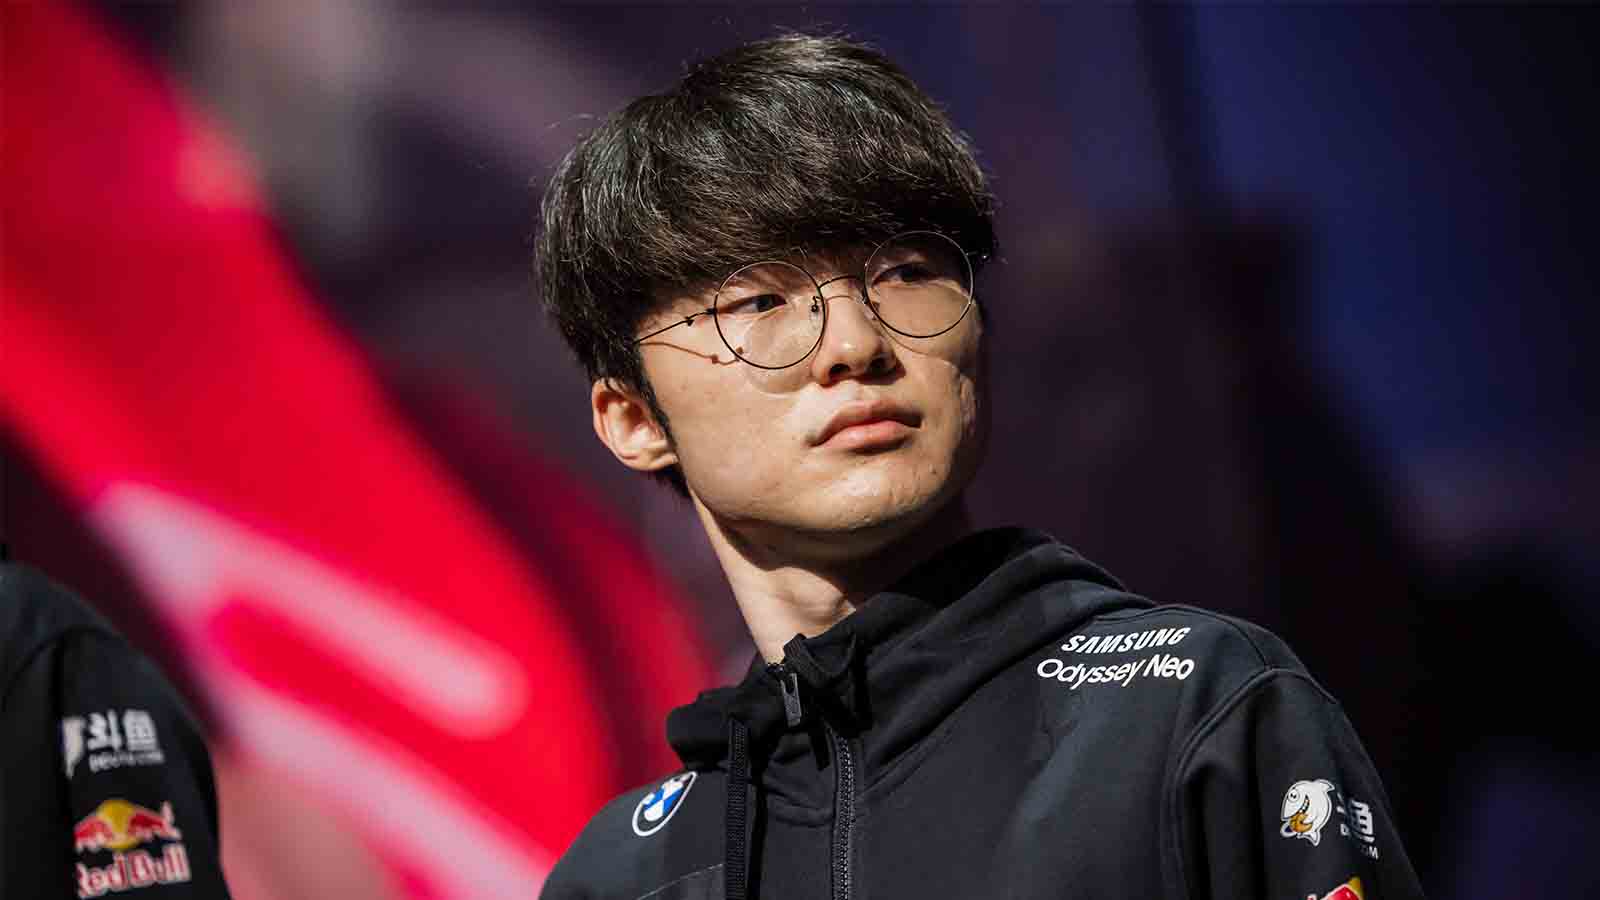 Faker Lol pro gamer facts | Red Bull Esports